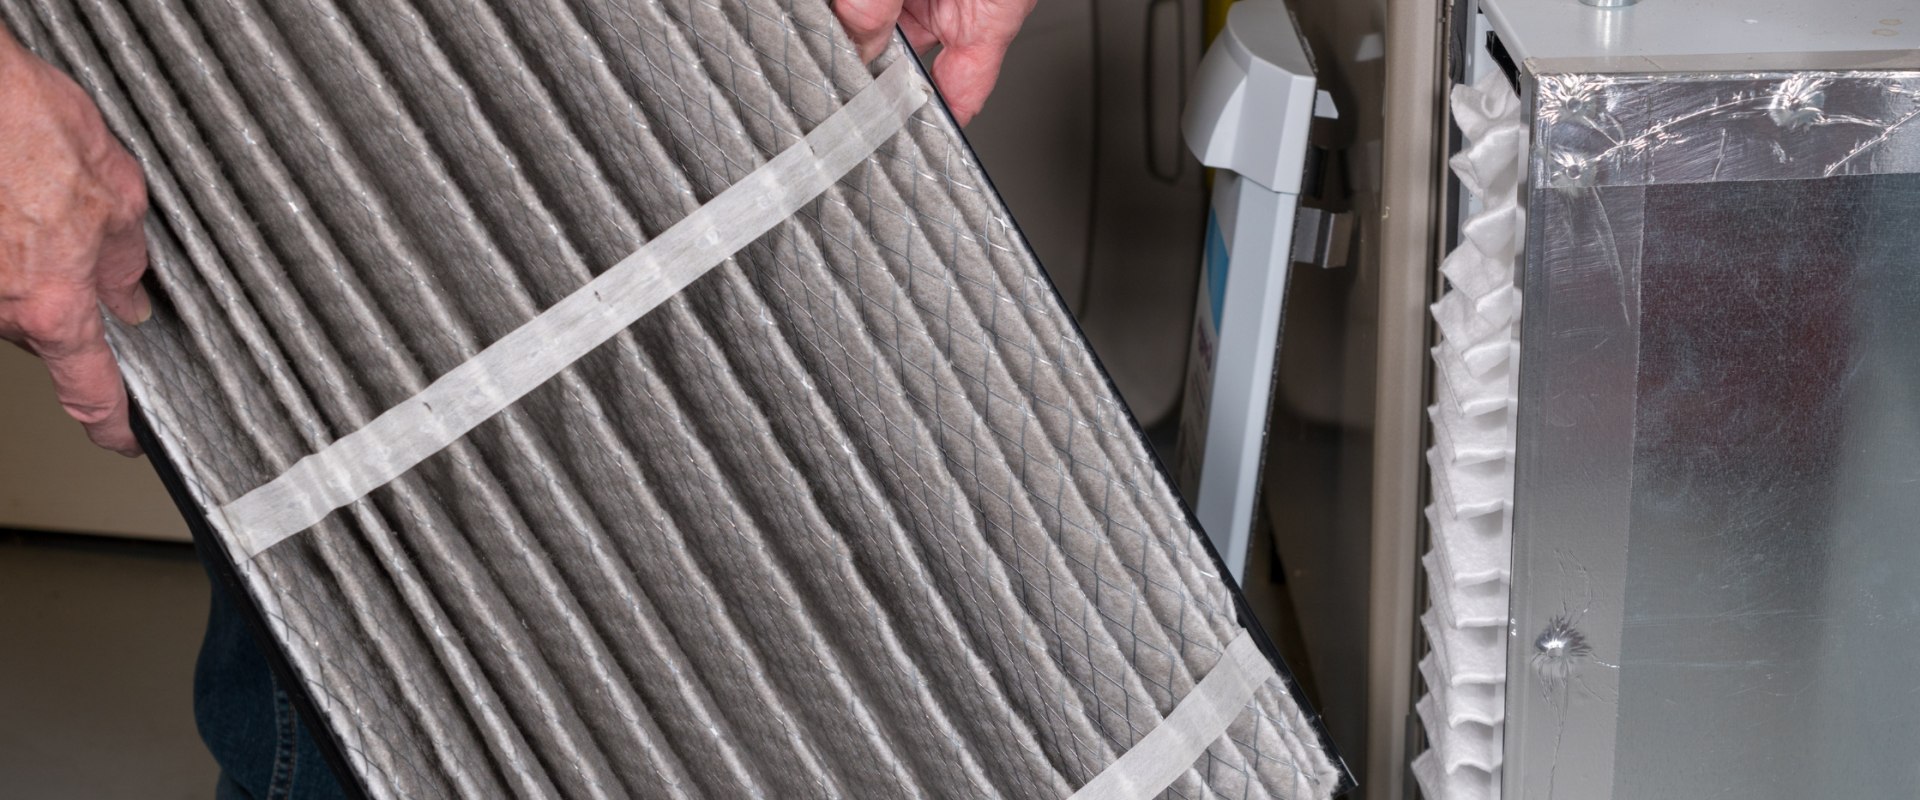 Do Furnace Filters Come in Standard Sizes? - A Comprehensive Guide